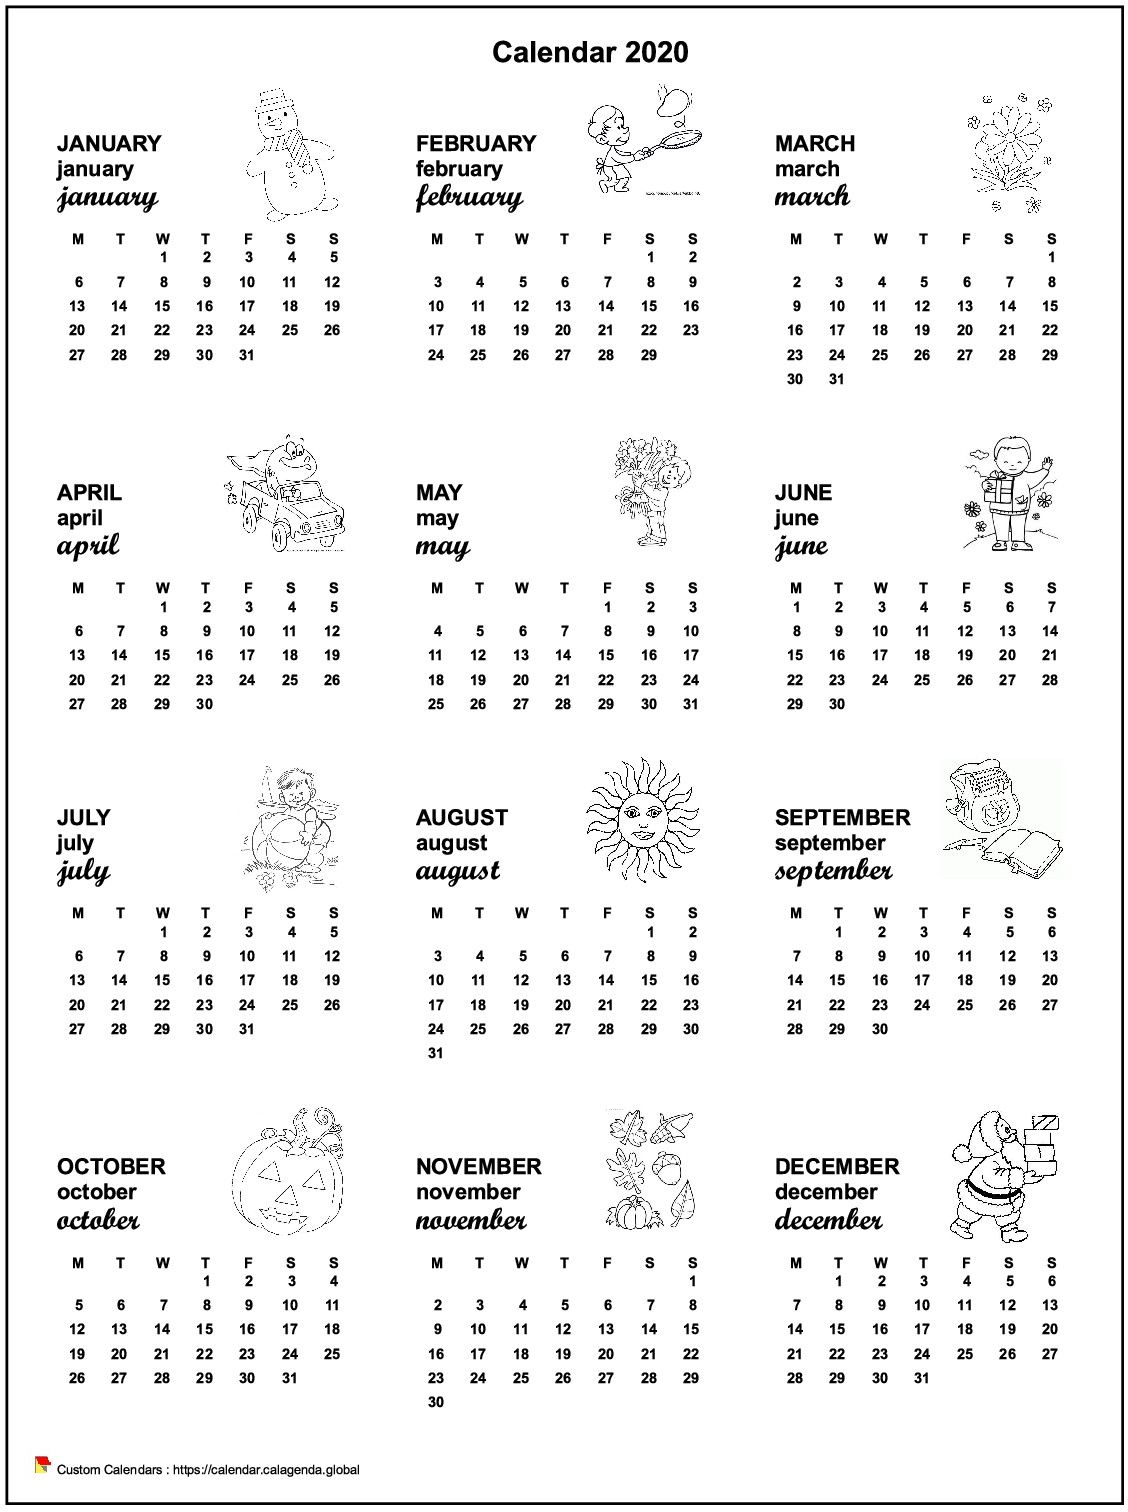 Calendar 2080 annual maternal and primary school